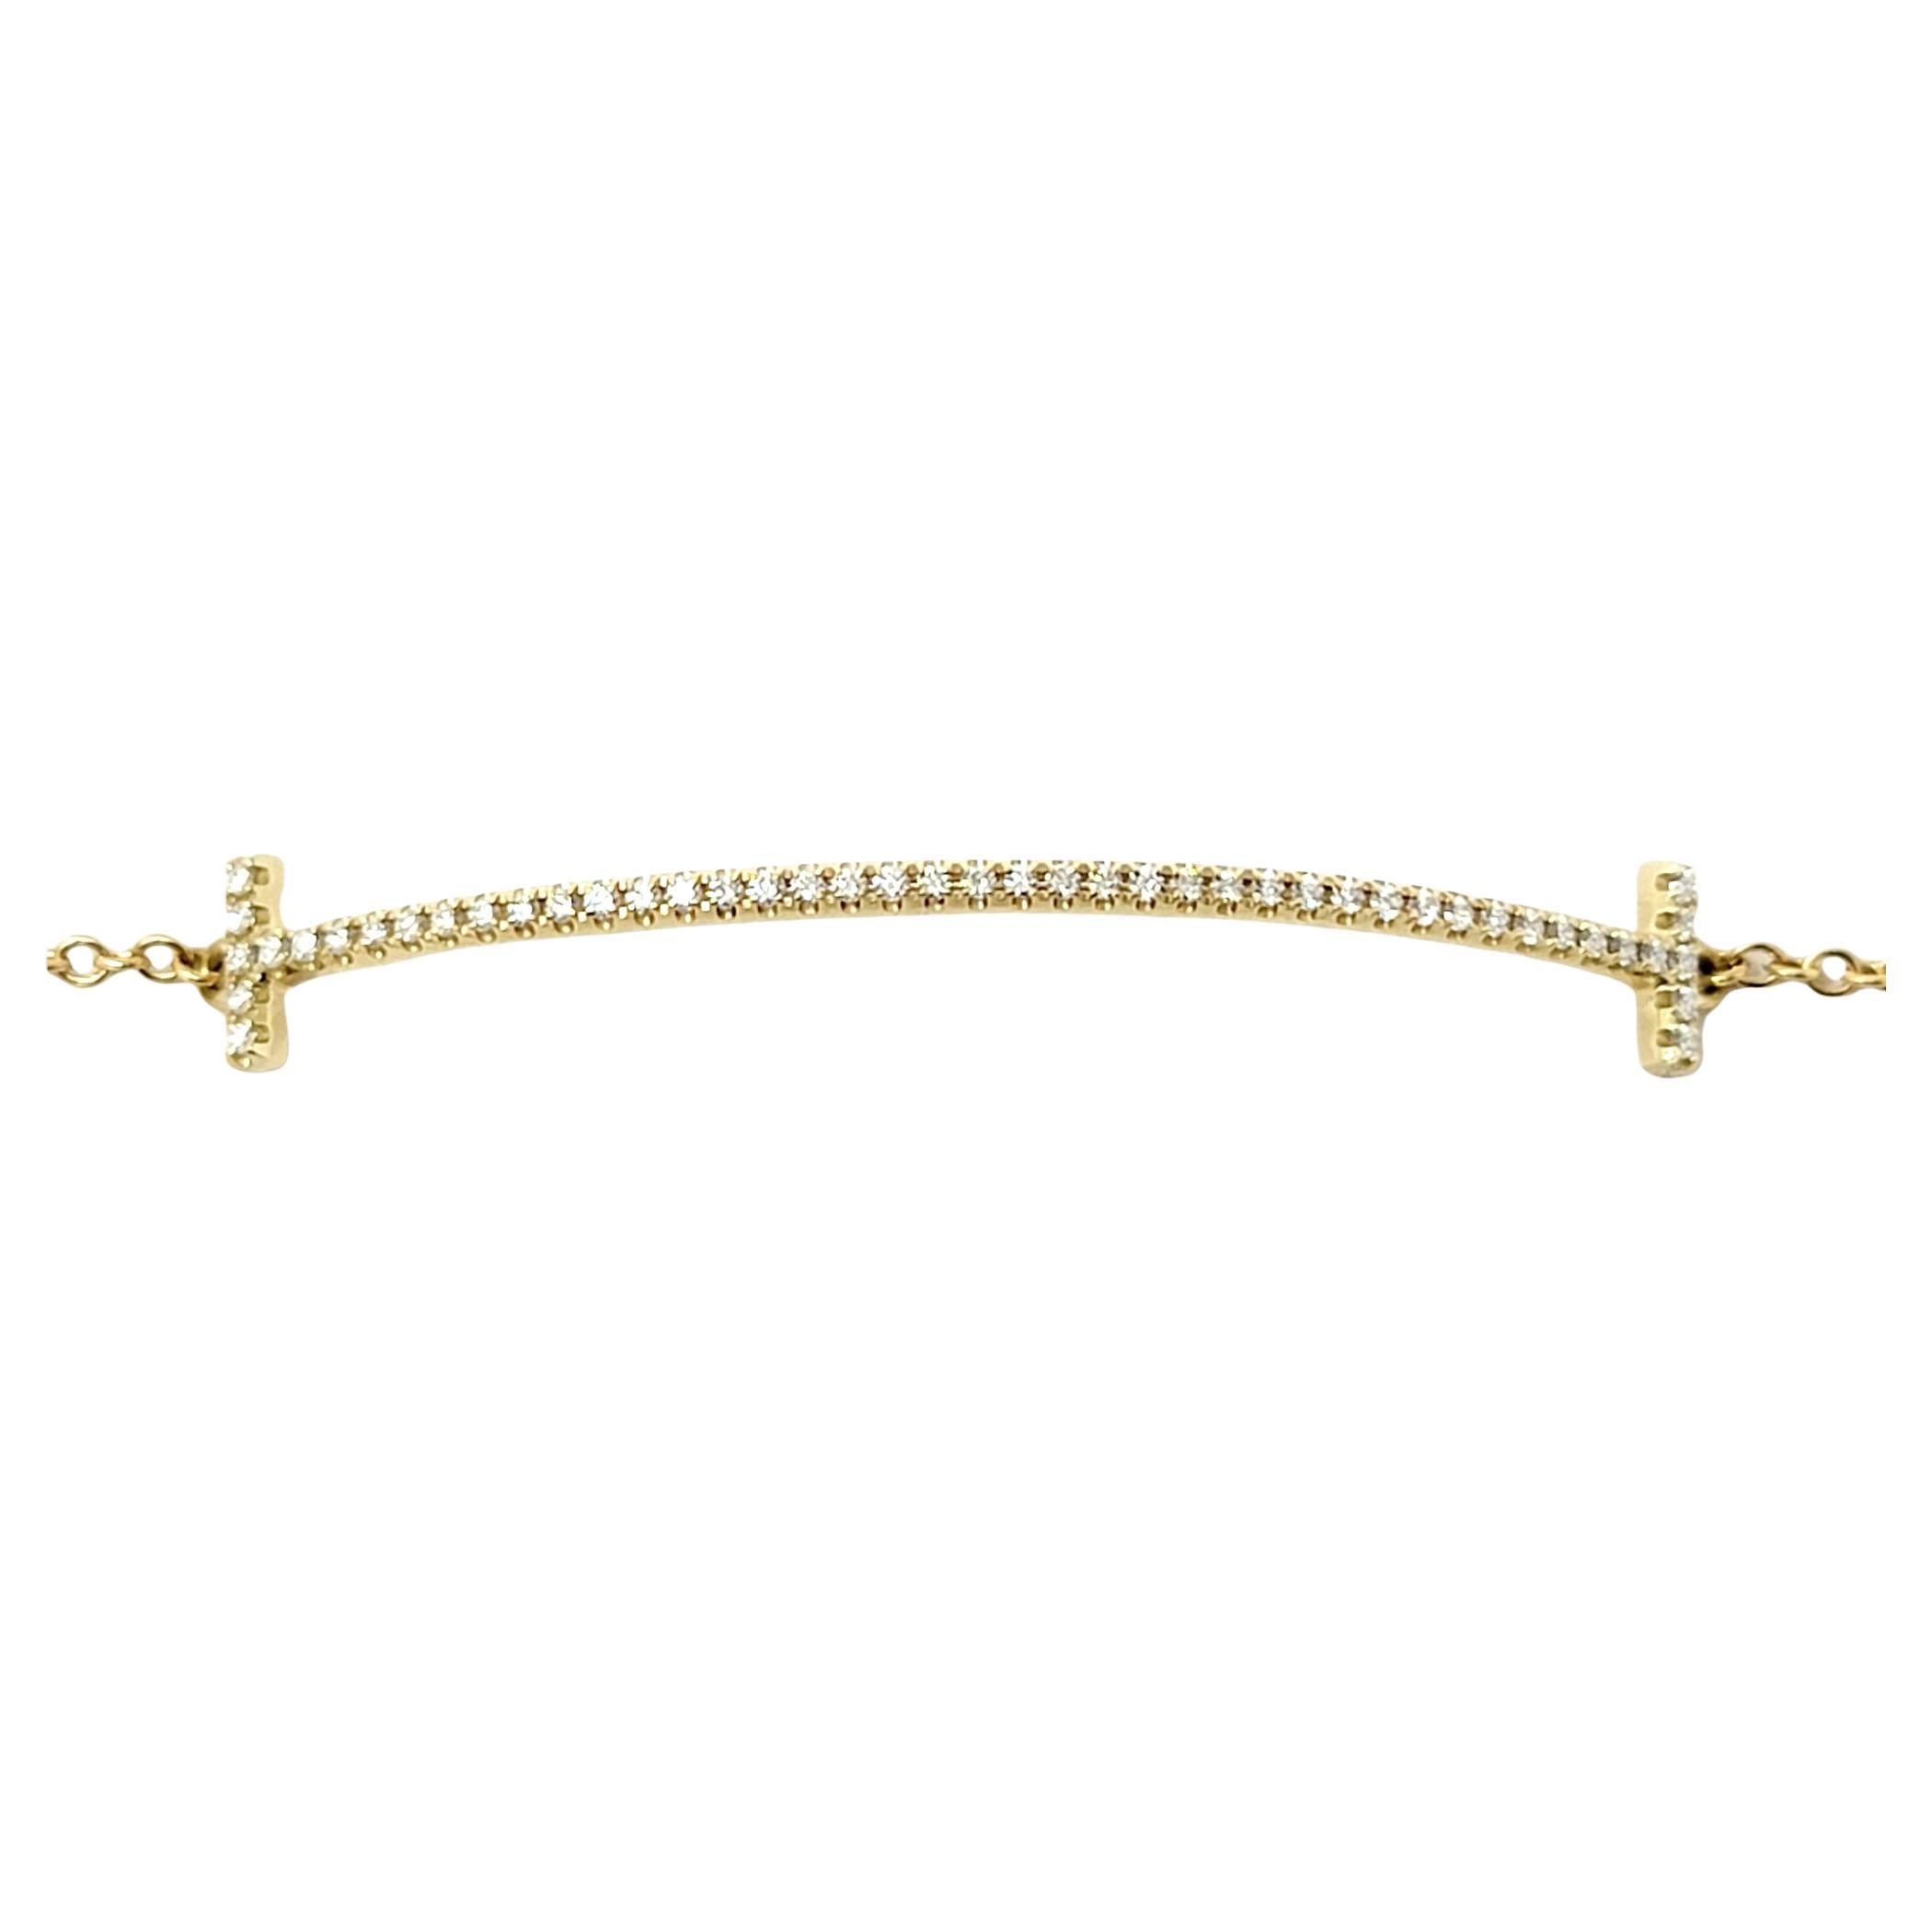 See minimalist elegance at its finest in this gorgeous Tiffany T Smile bracelet.  Sparkling Tiffany diamonds trace the elegant curve of this stunning piece, enhancing the clean lines and contemporary design. Pair it with other bracelets for a